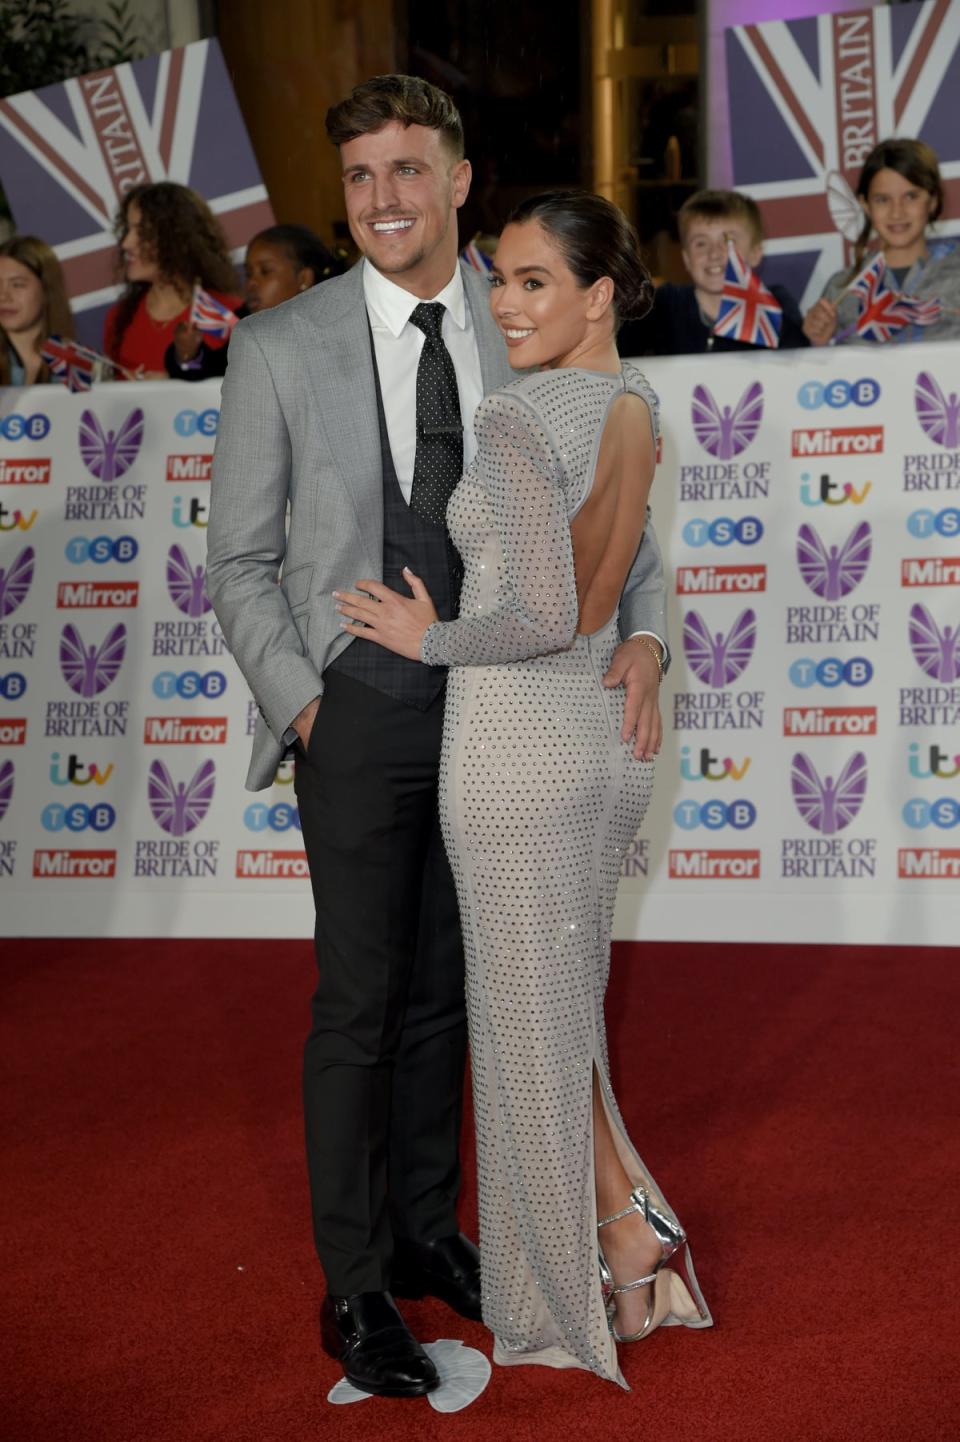 Owen and Bish looked closer than ever on the red carpet at London’s Grosvenor House on Monday night (Getty Images)